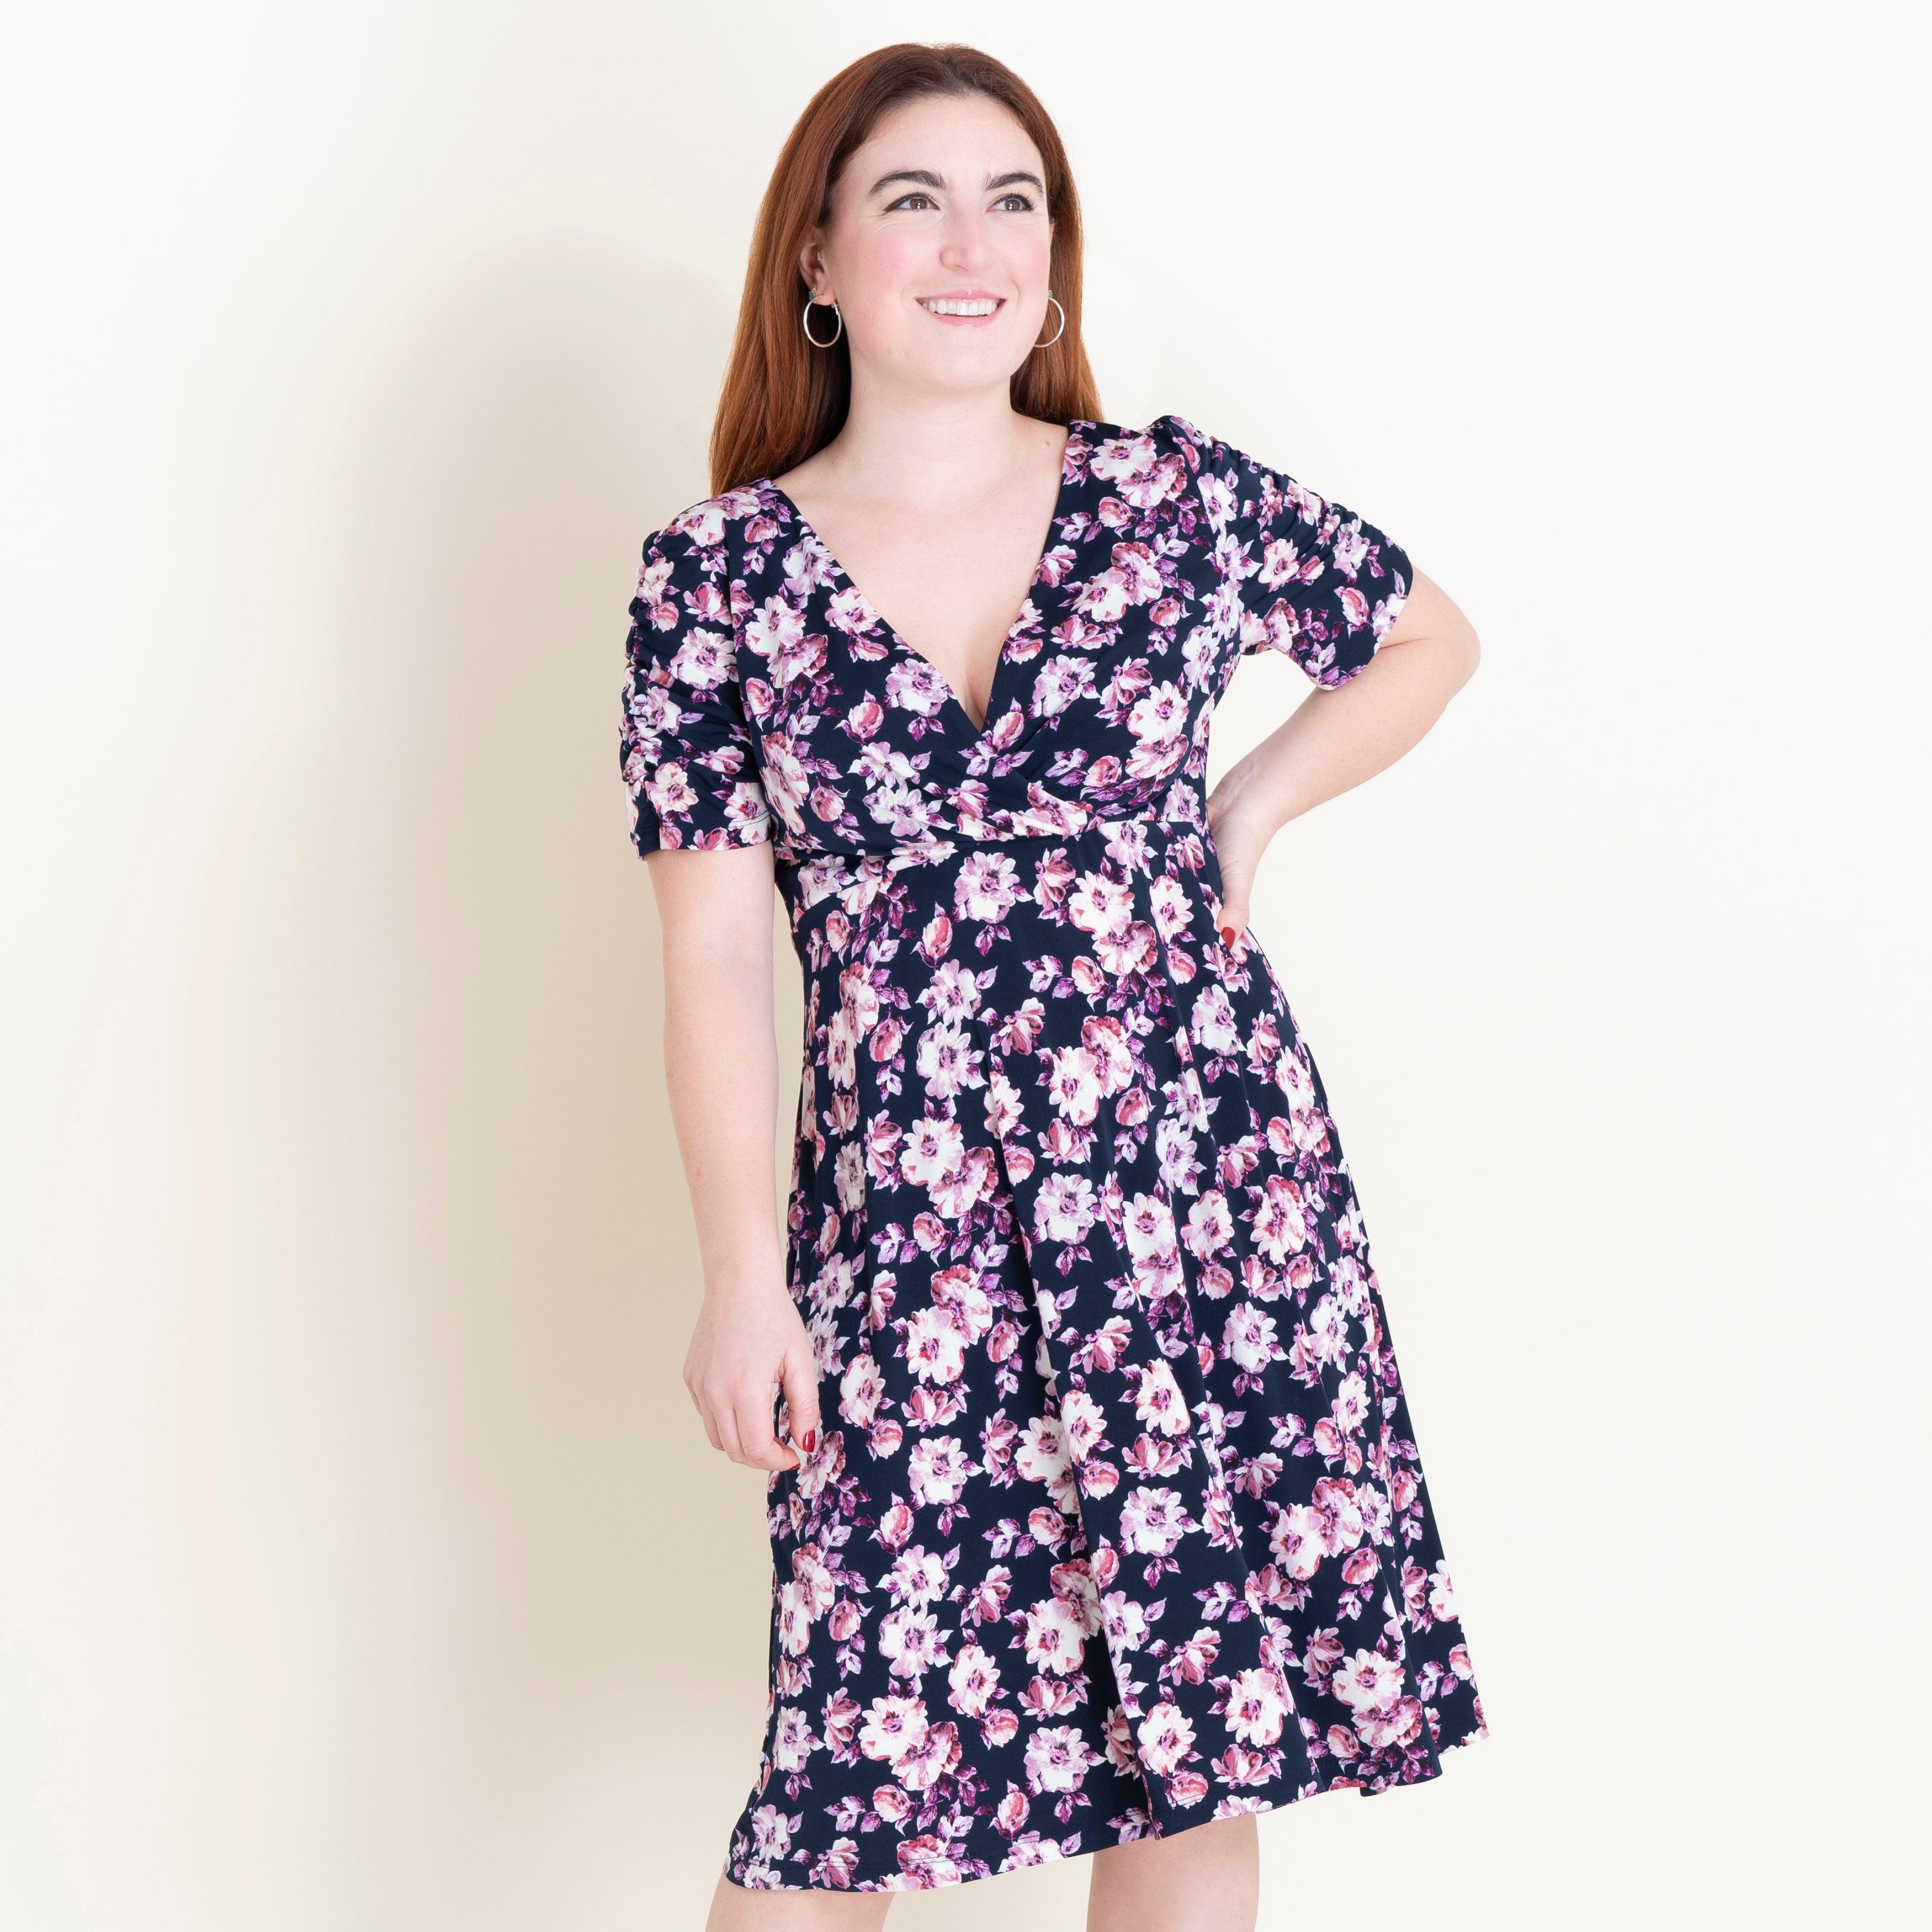 Woman posing wearing Navy/Mauve Valerie Floral Fit and Flare Dress from Connected Apparel